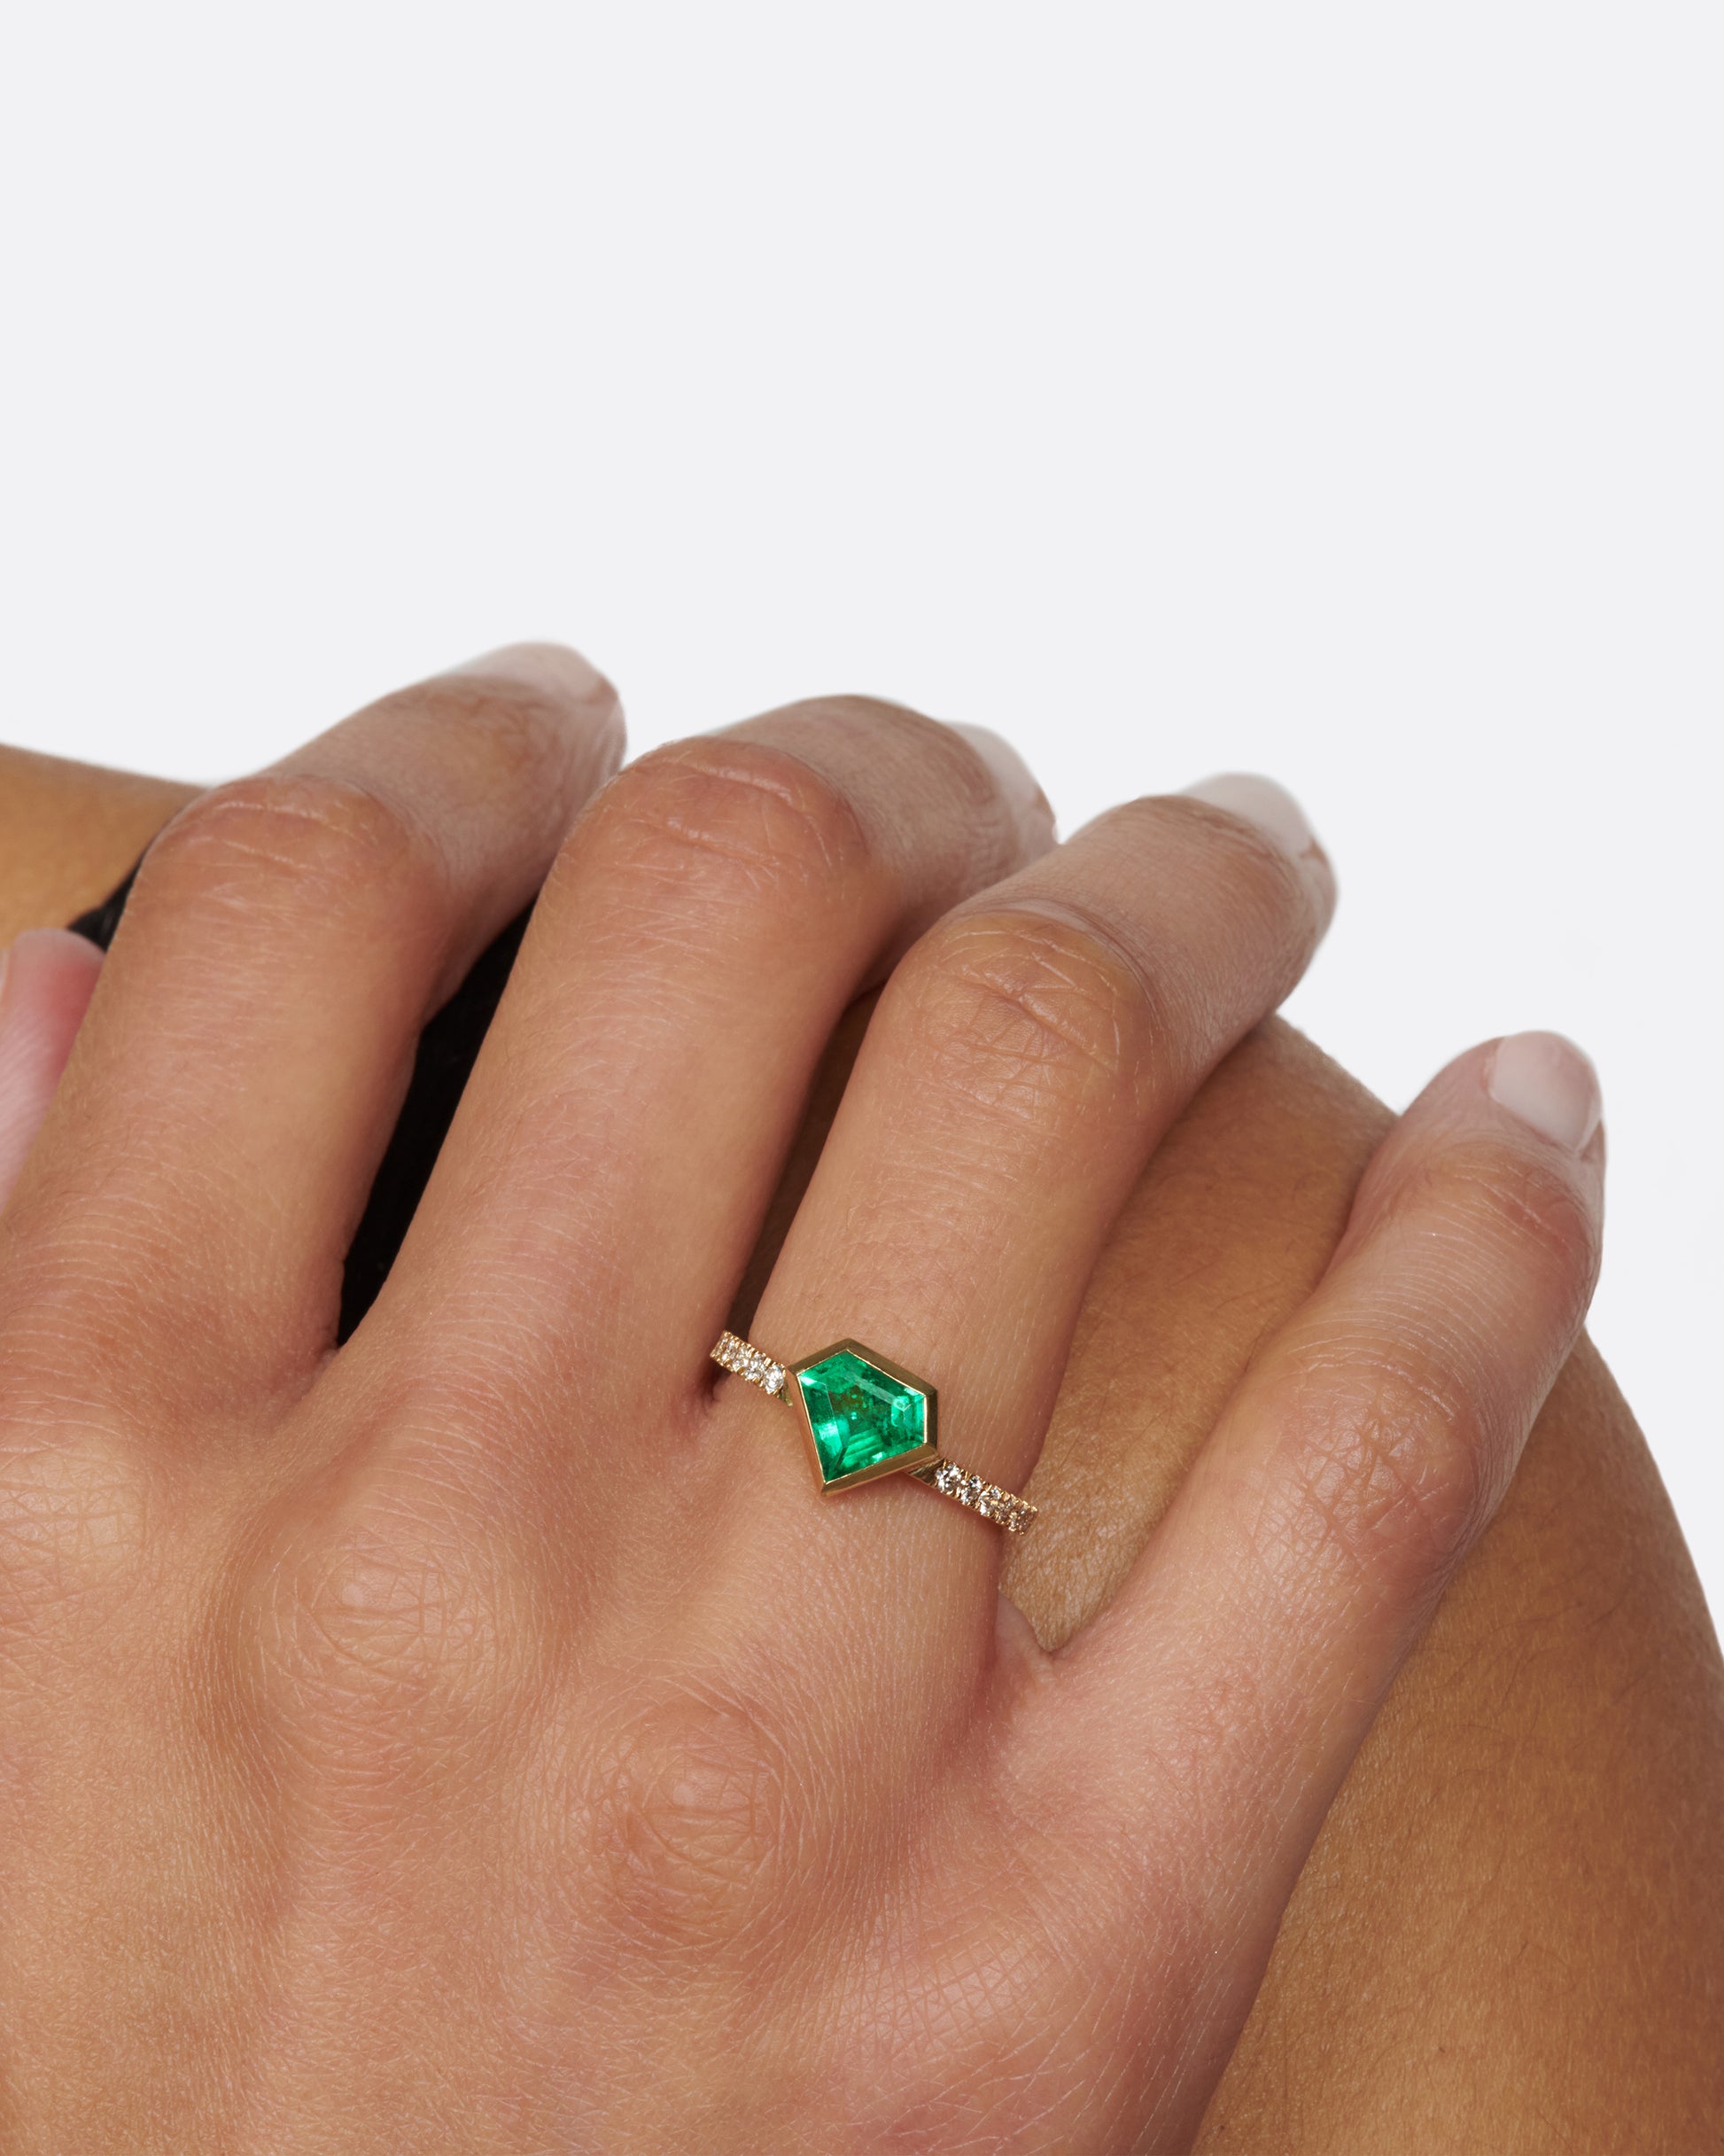 A new iteration of ERA's classic mosaic stacking ring, this time with a spectacular emerald.